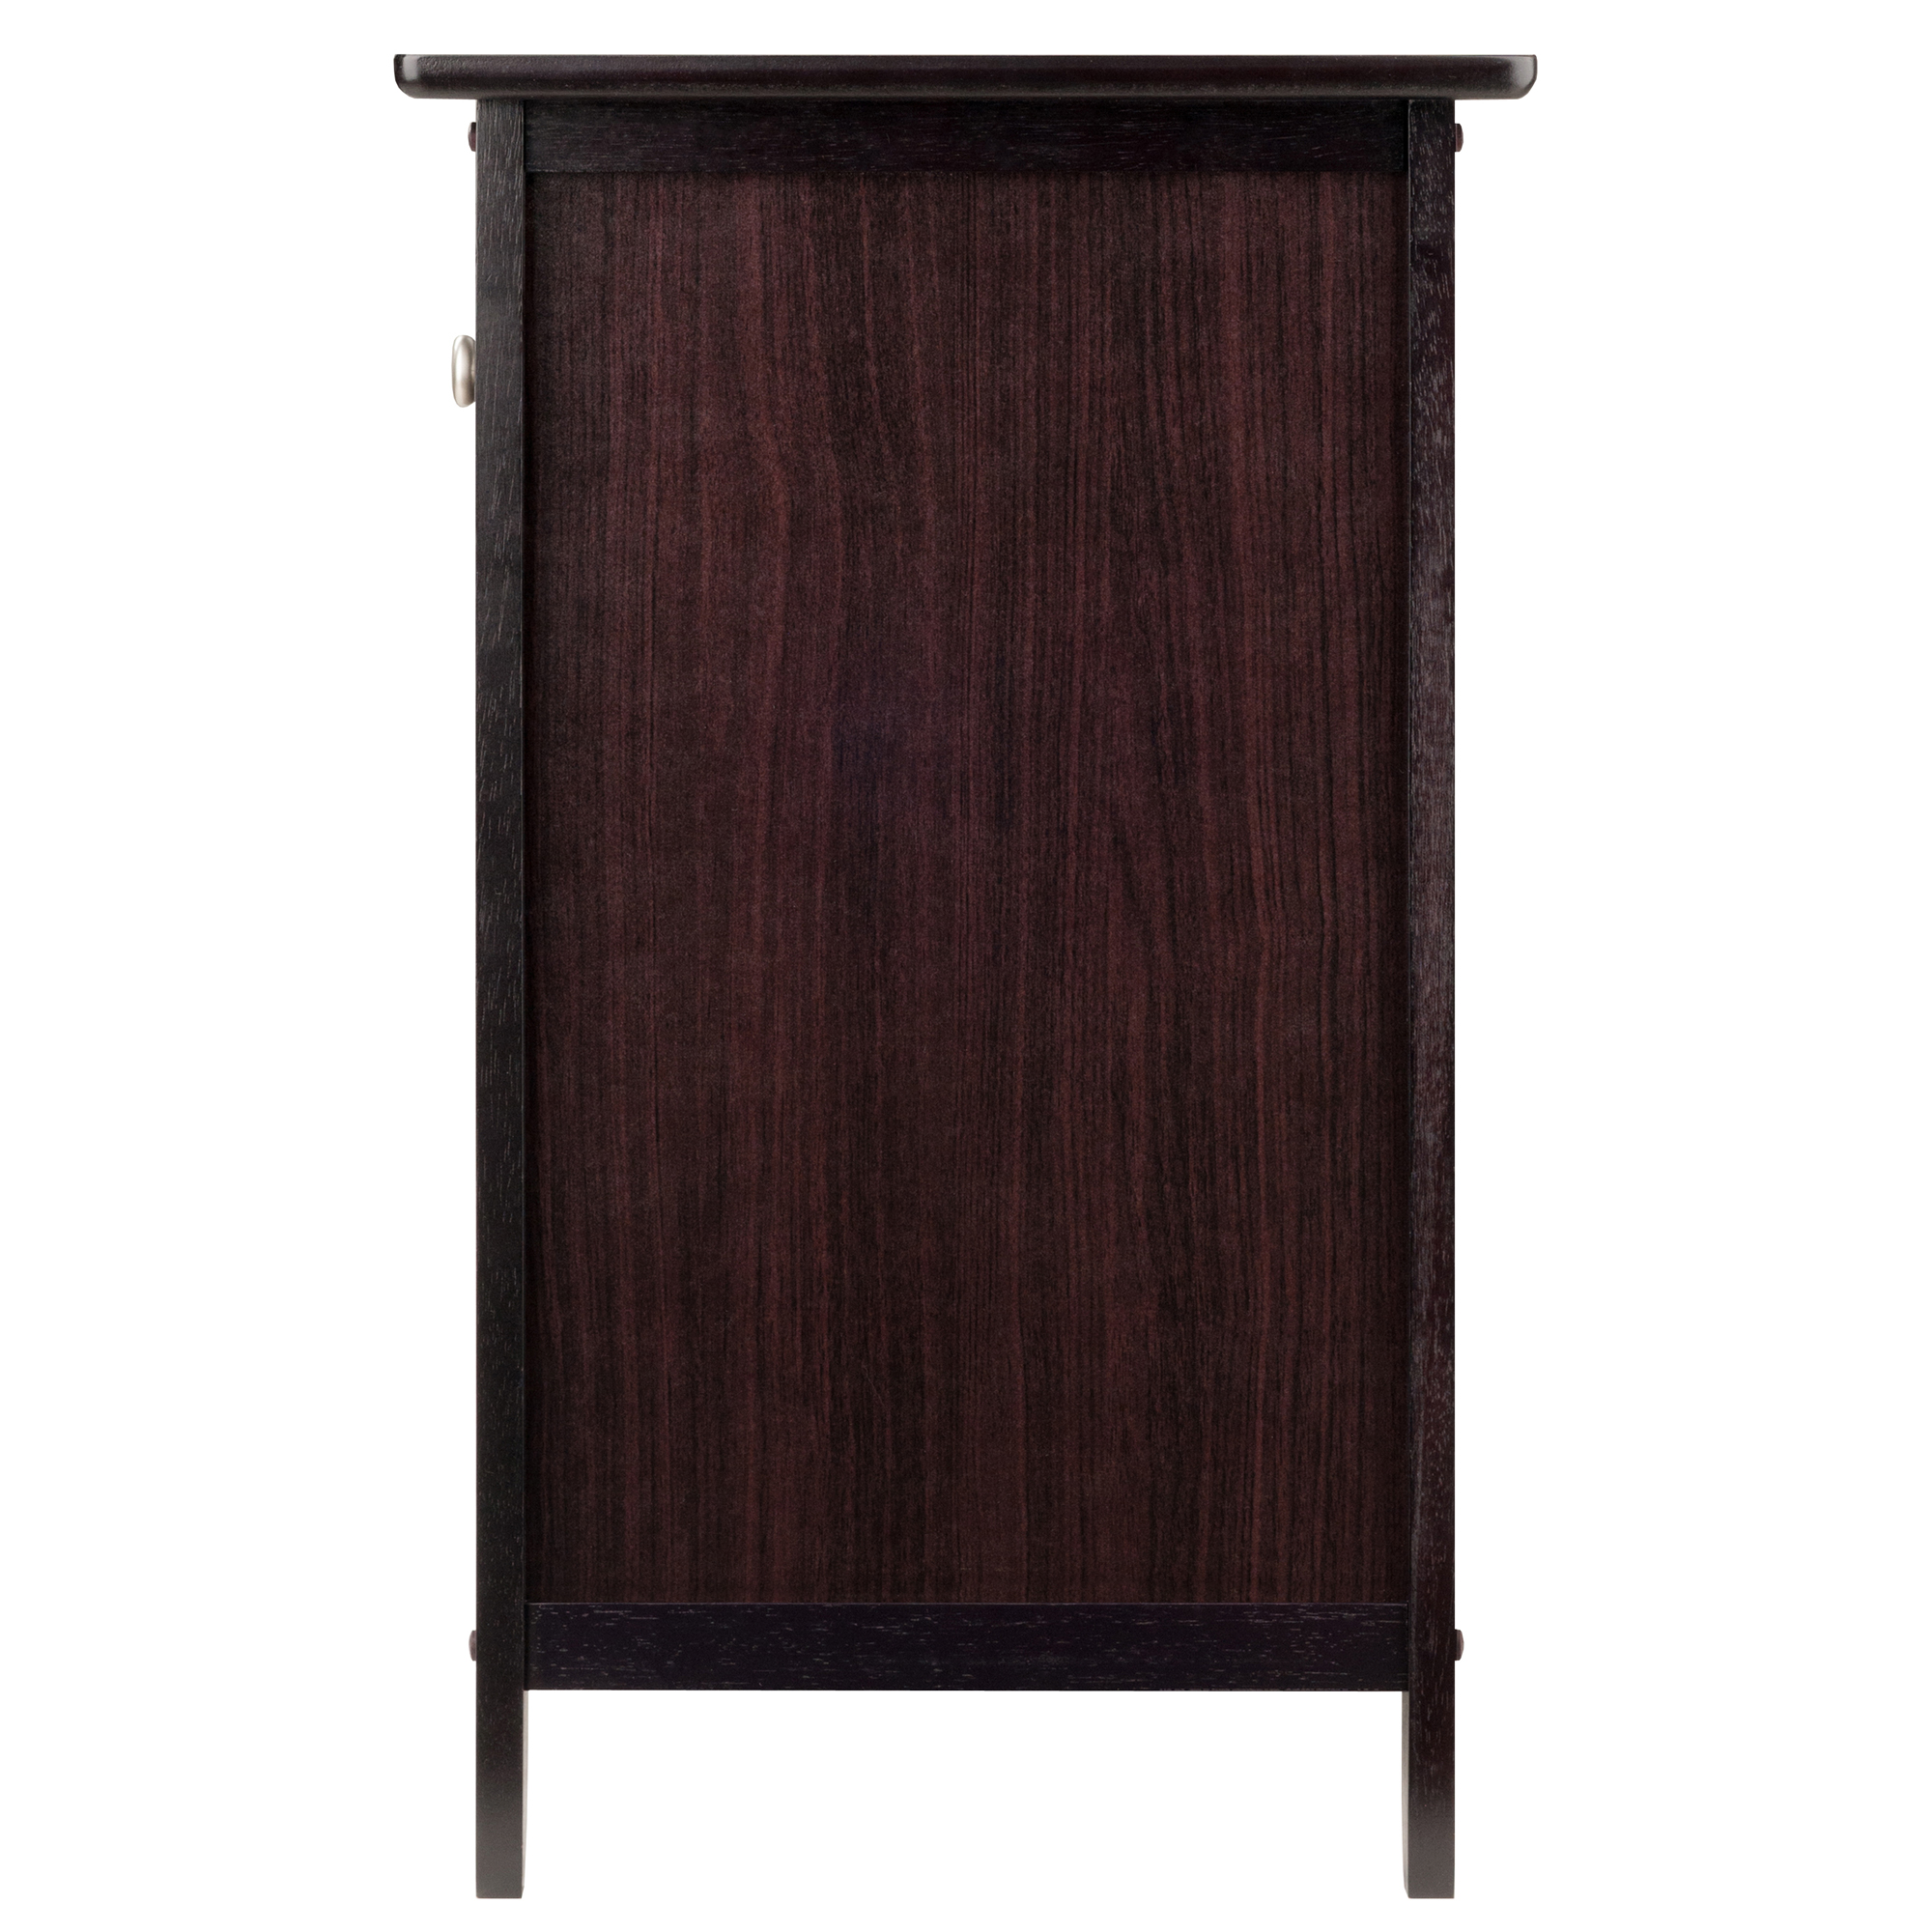 Winsome Wood Eugene Accent Table, Nightstand, Espresso Finish - image 5 of 9